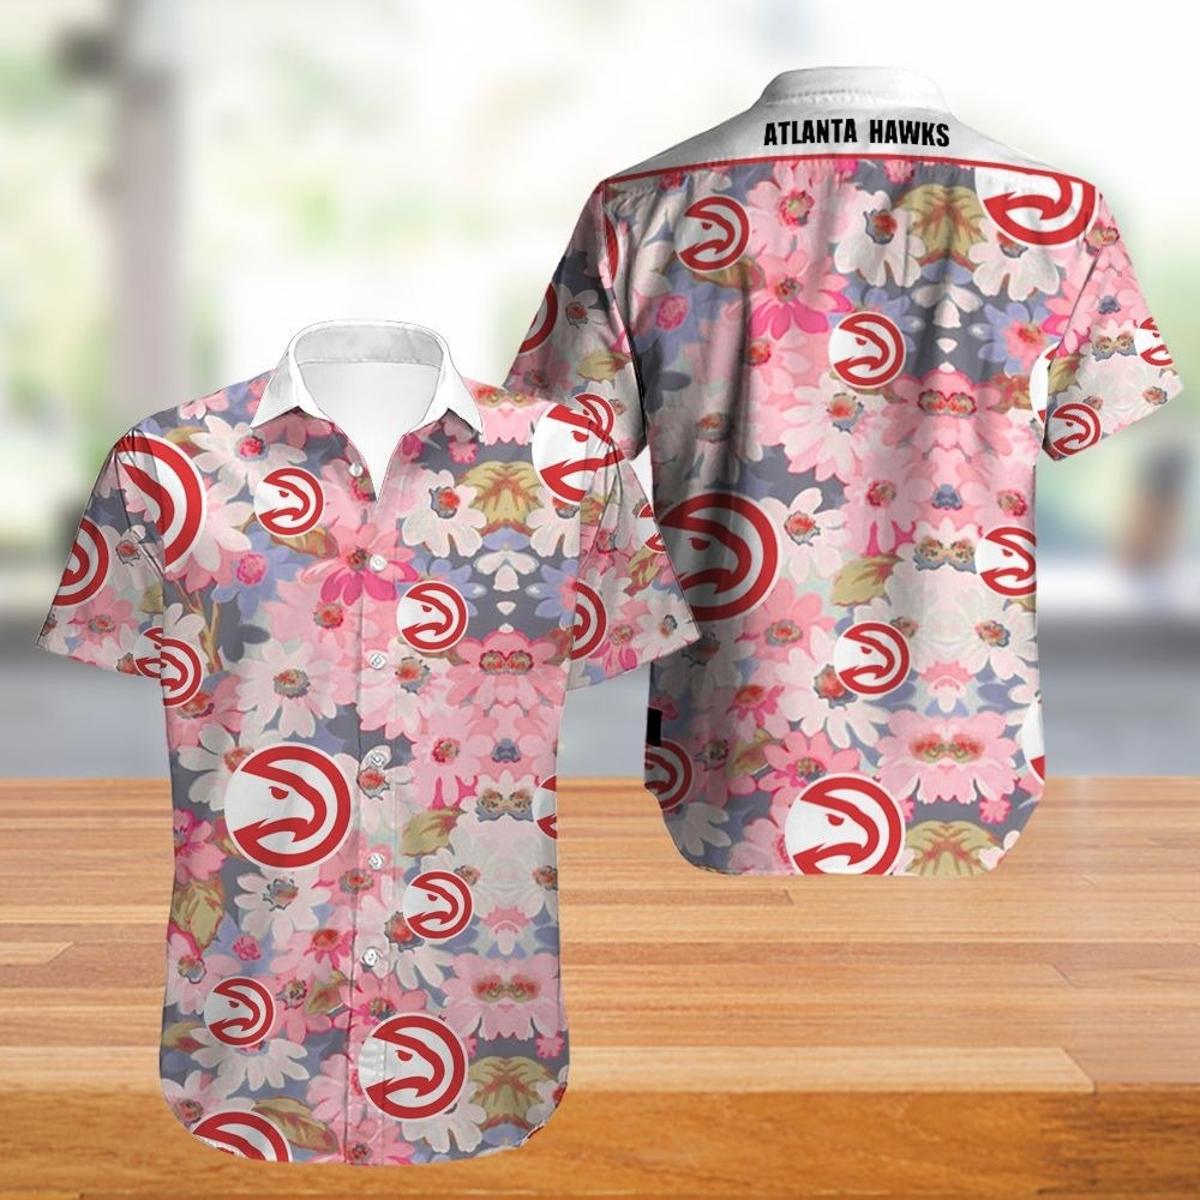 Afl Adelaide Crows Summer Beach Patterns Hawaiian Shirt Best Gifts For Fans